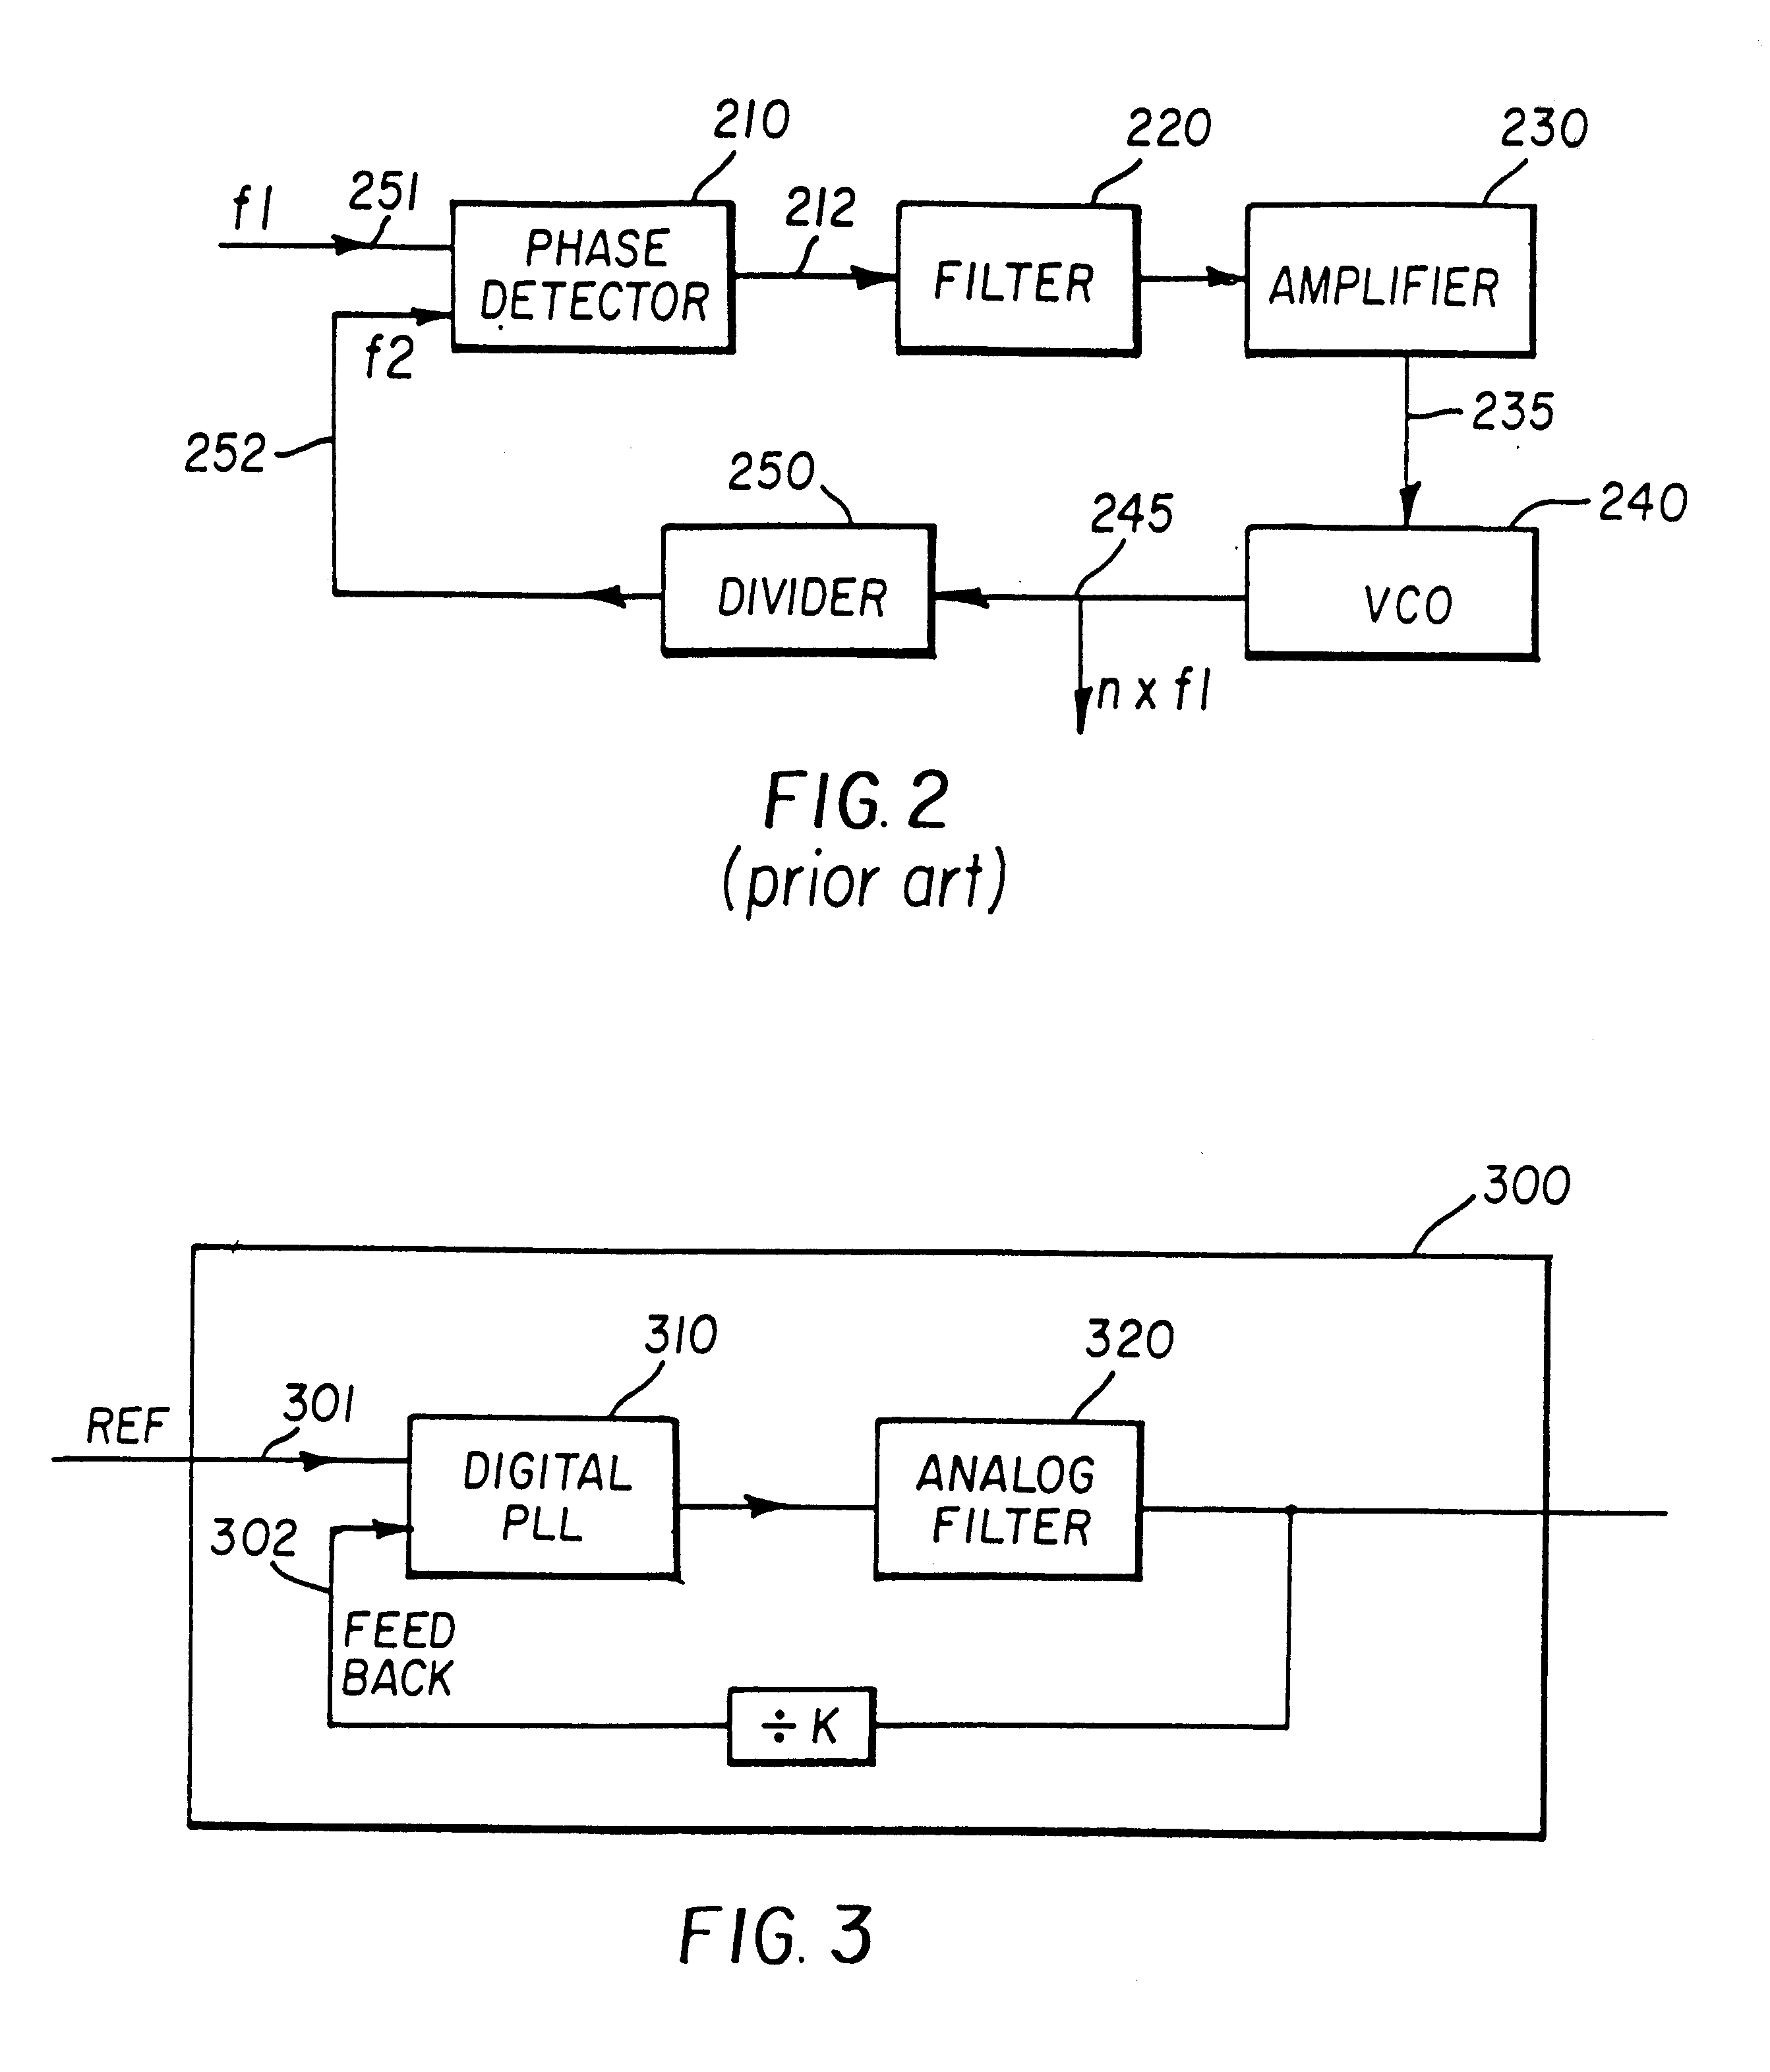 Circuit and method for generating pixel data elements from analog image data and associated synchronization signals